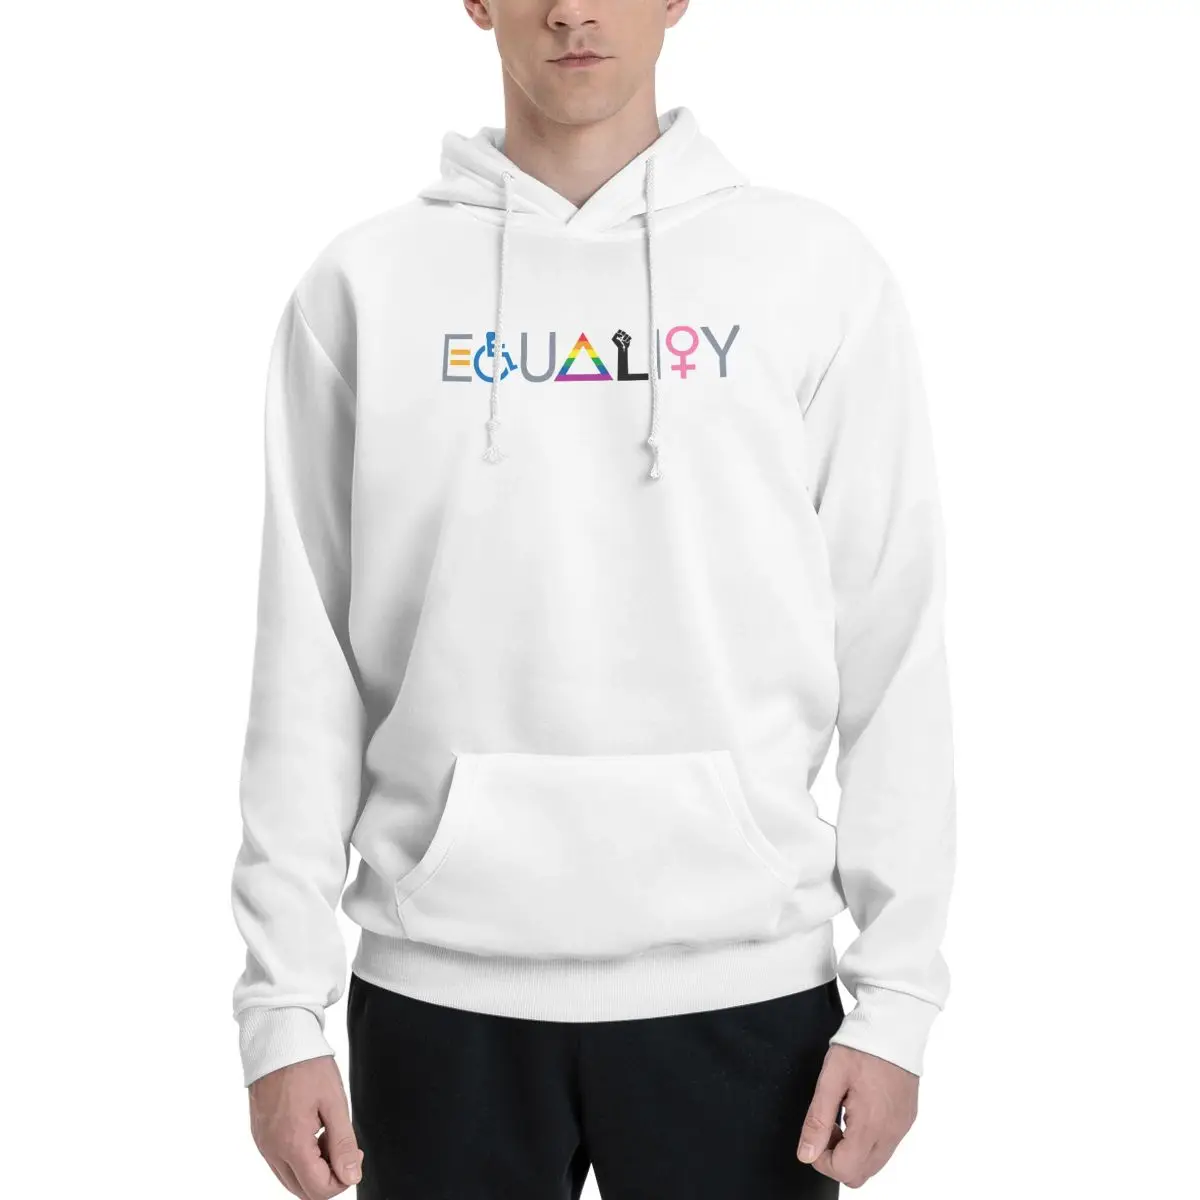 Lgbt Gay Rainbow Pride Fruity 2 Couples Plus Velvet Hooded Sweater Novelty Fitness beautiful With hood pullover High quality